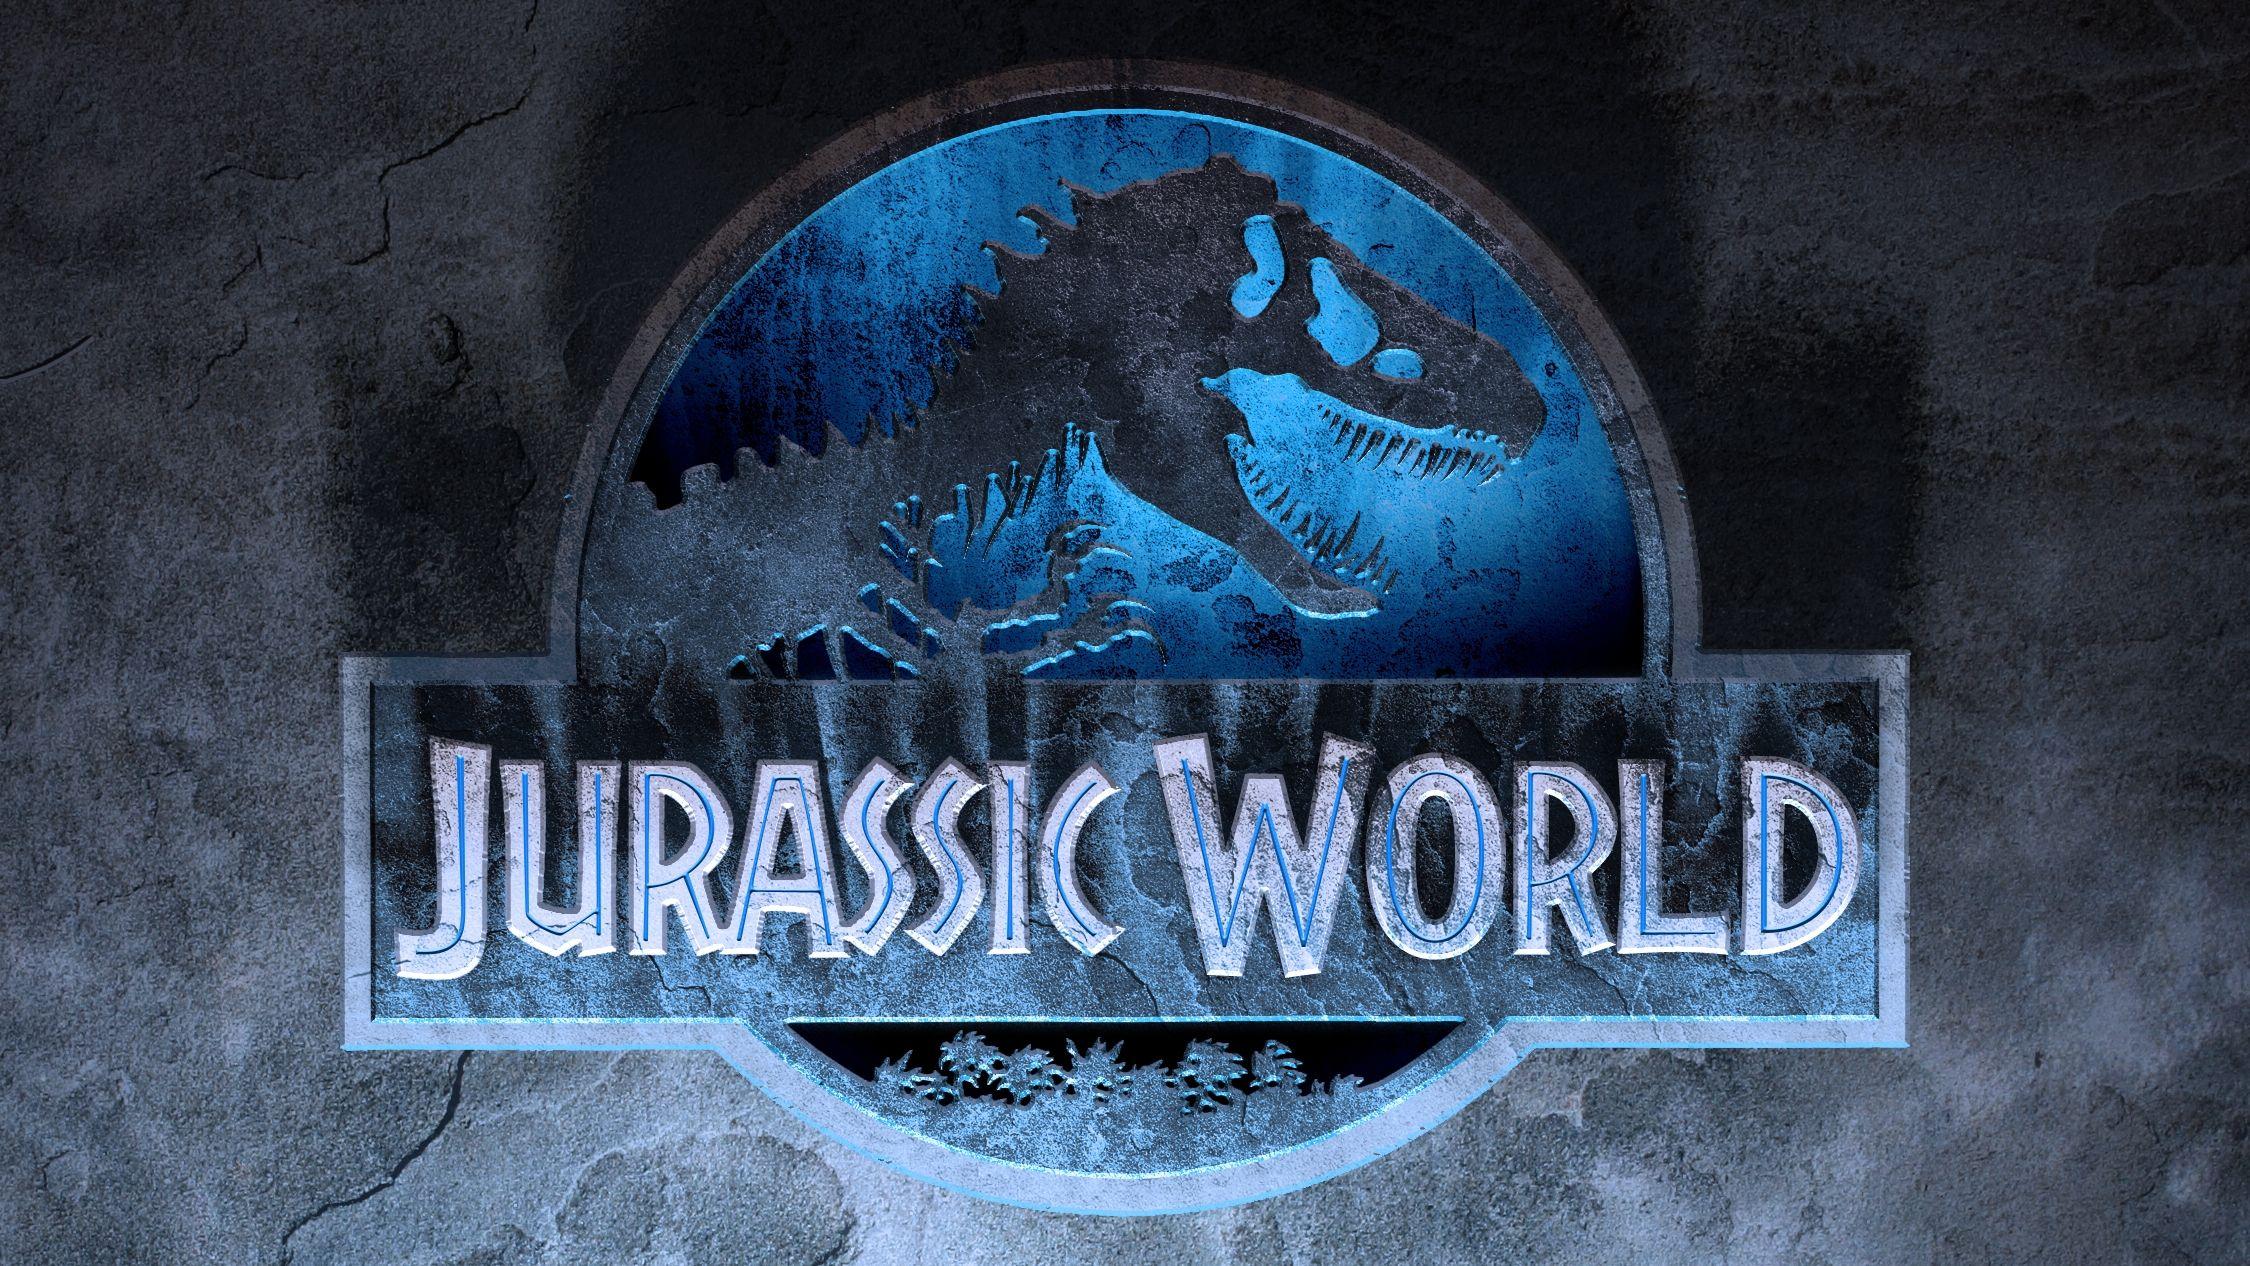 for iphone download Jurassic World: Dominion free